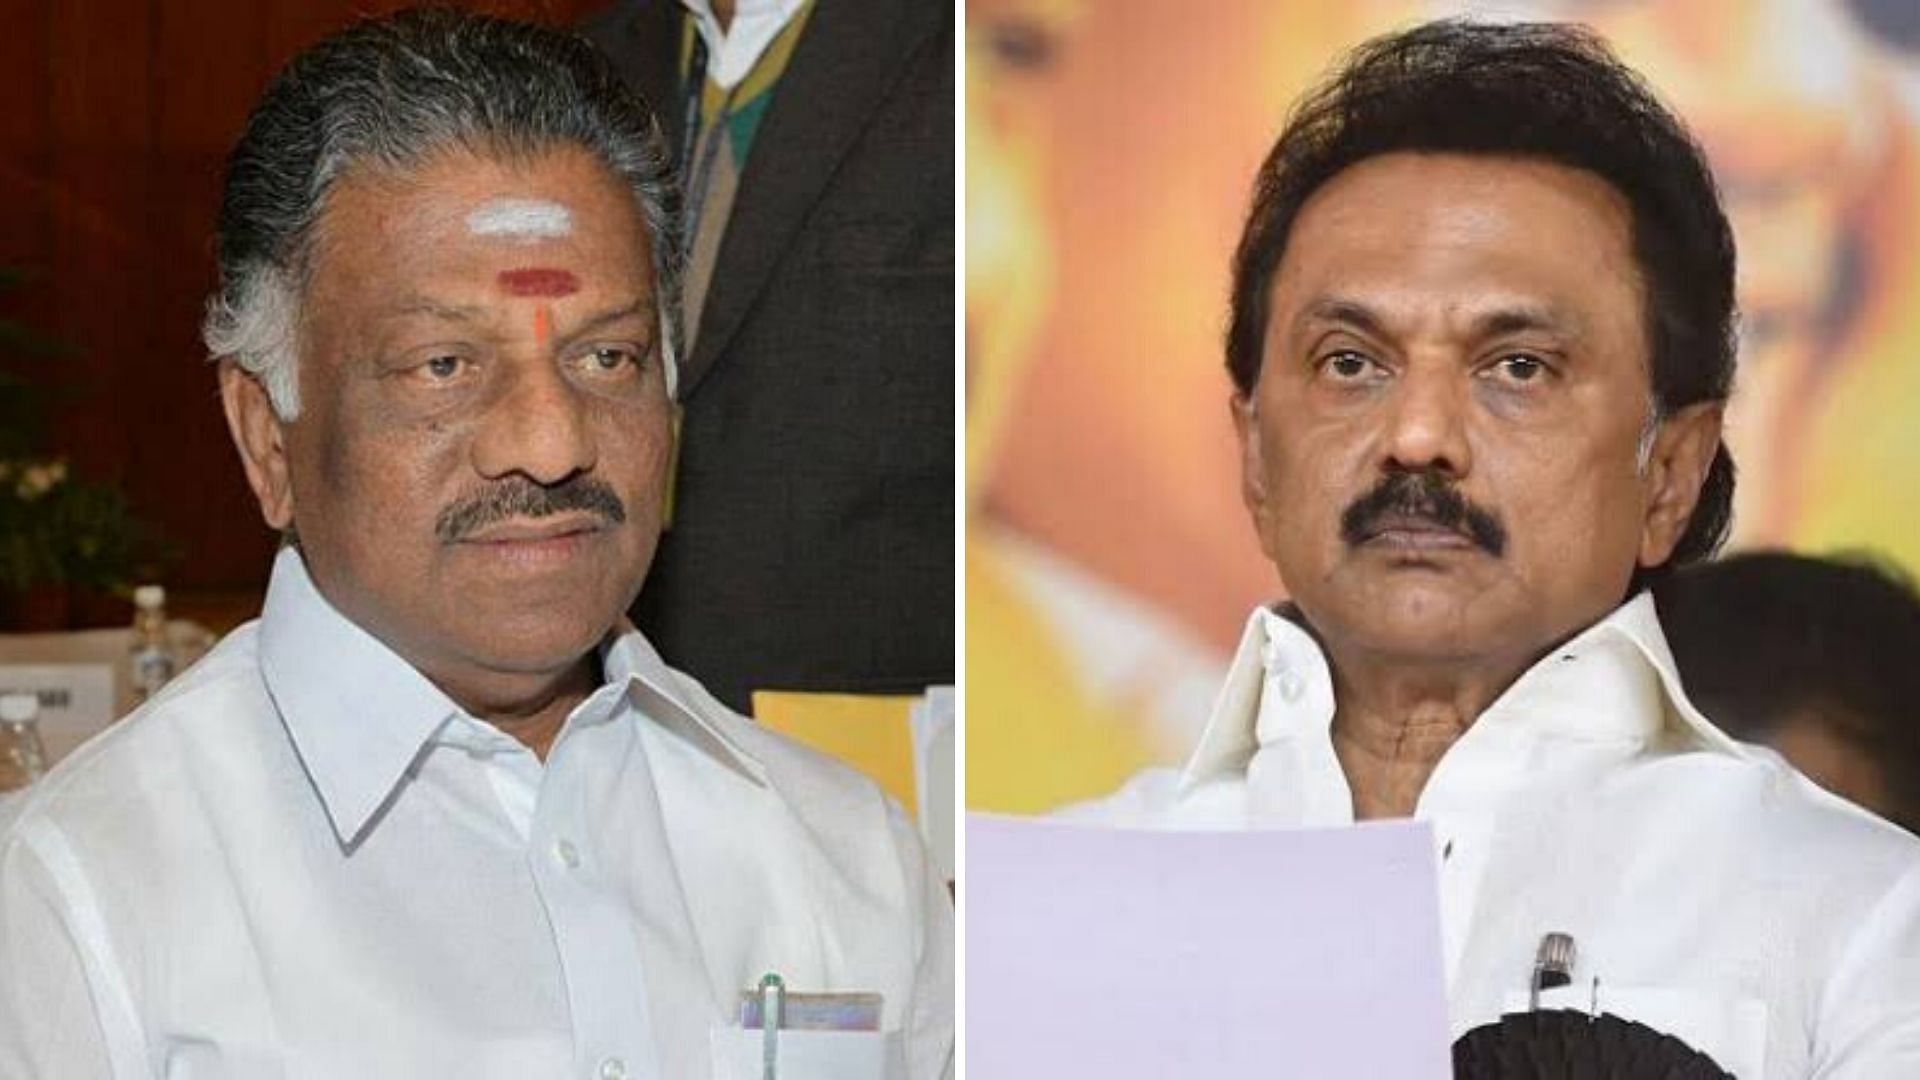 Former TN Chief Minister O Panneerselvam and DMK leader MK Stalin.